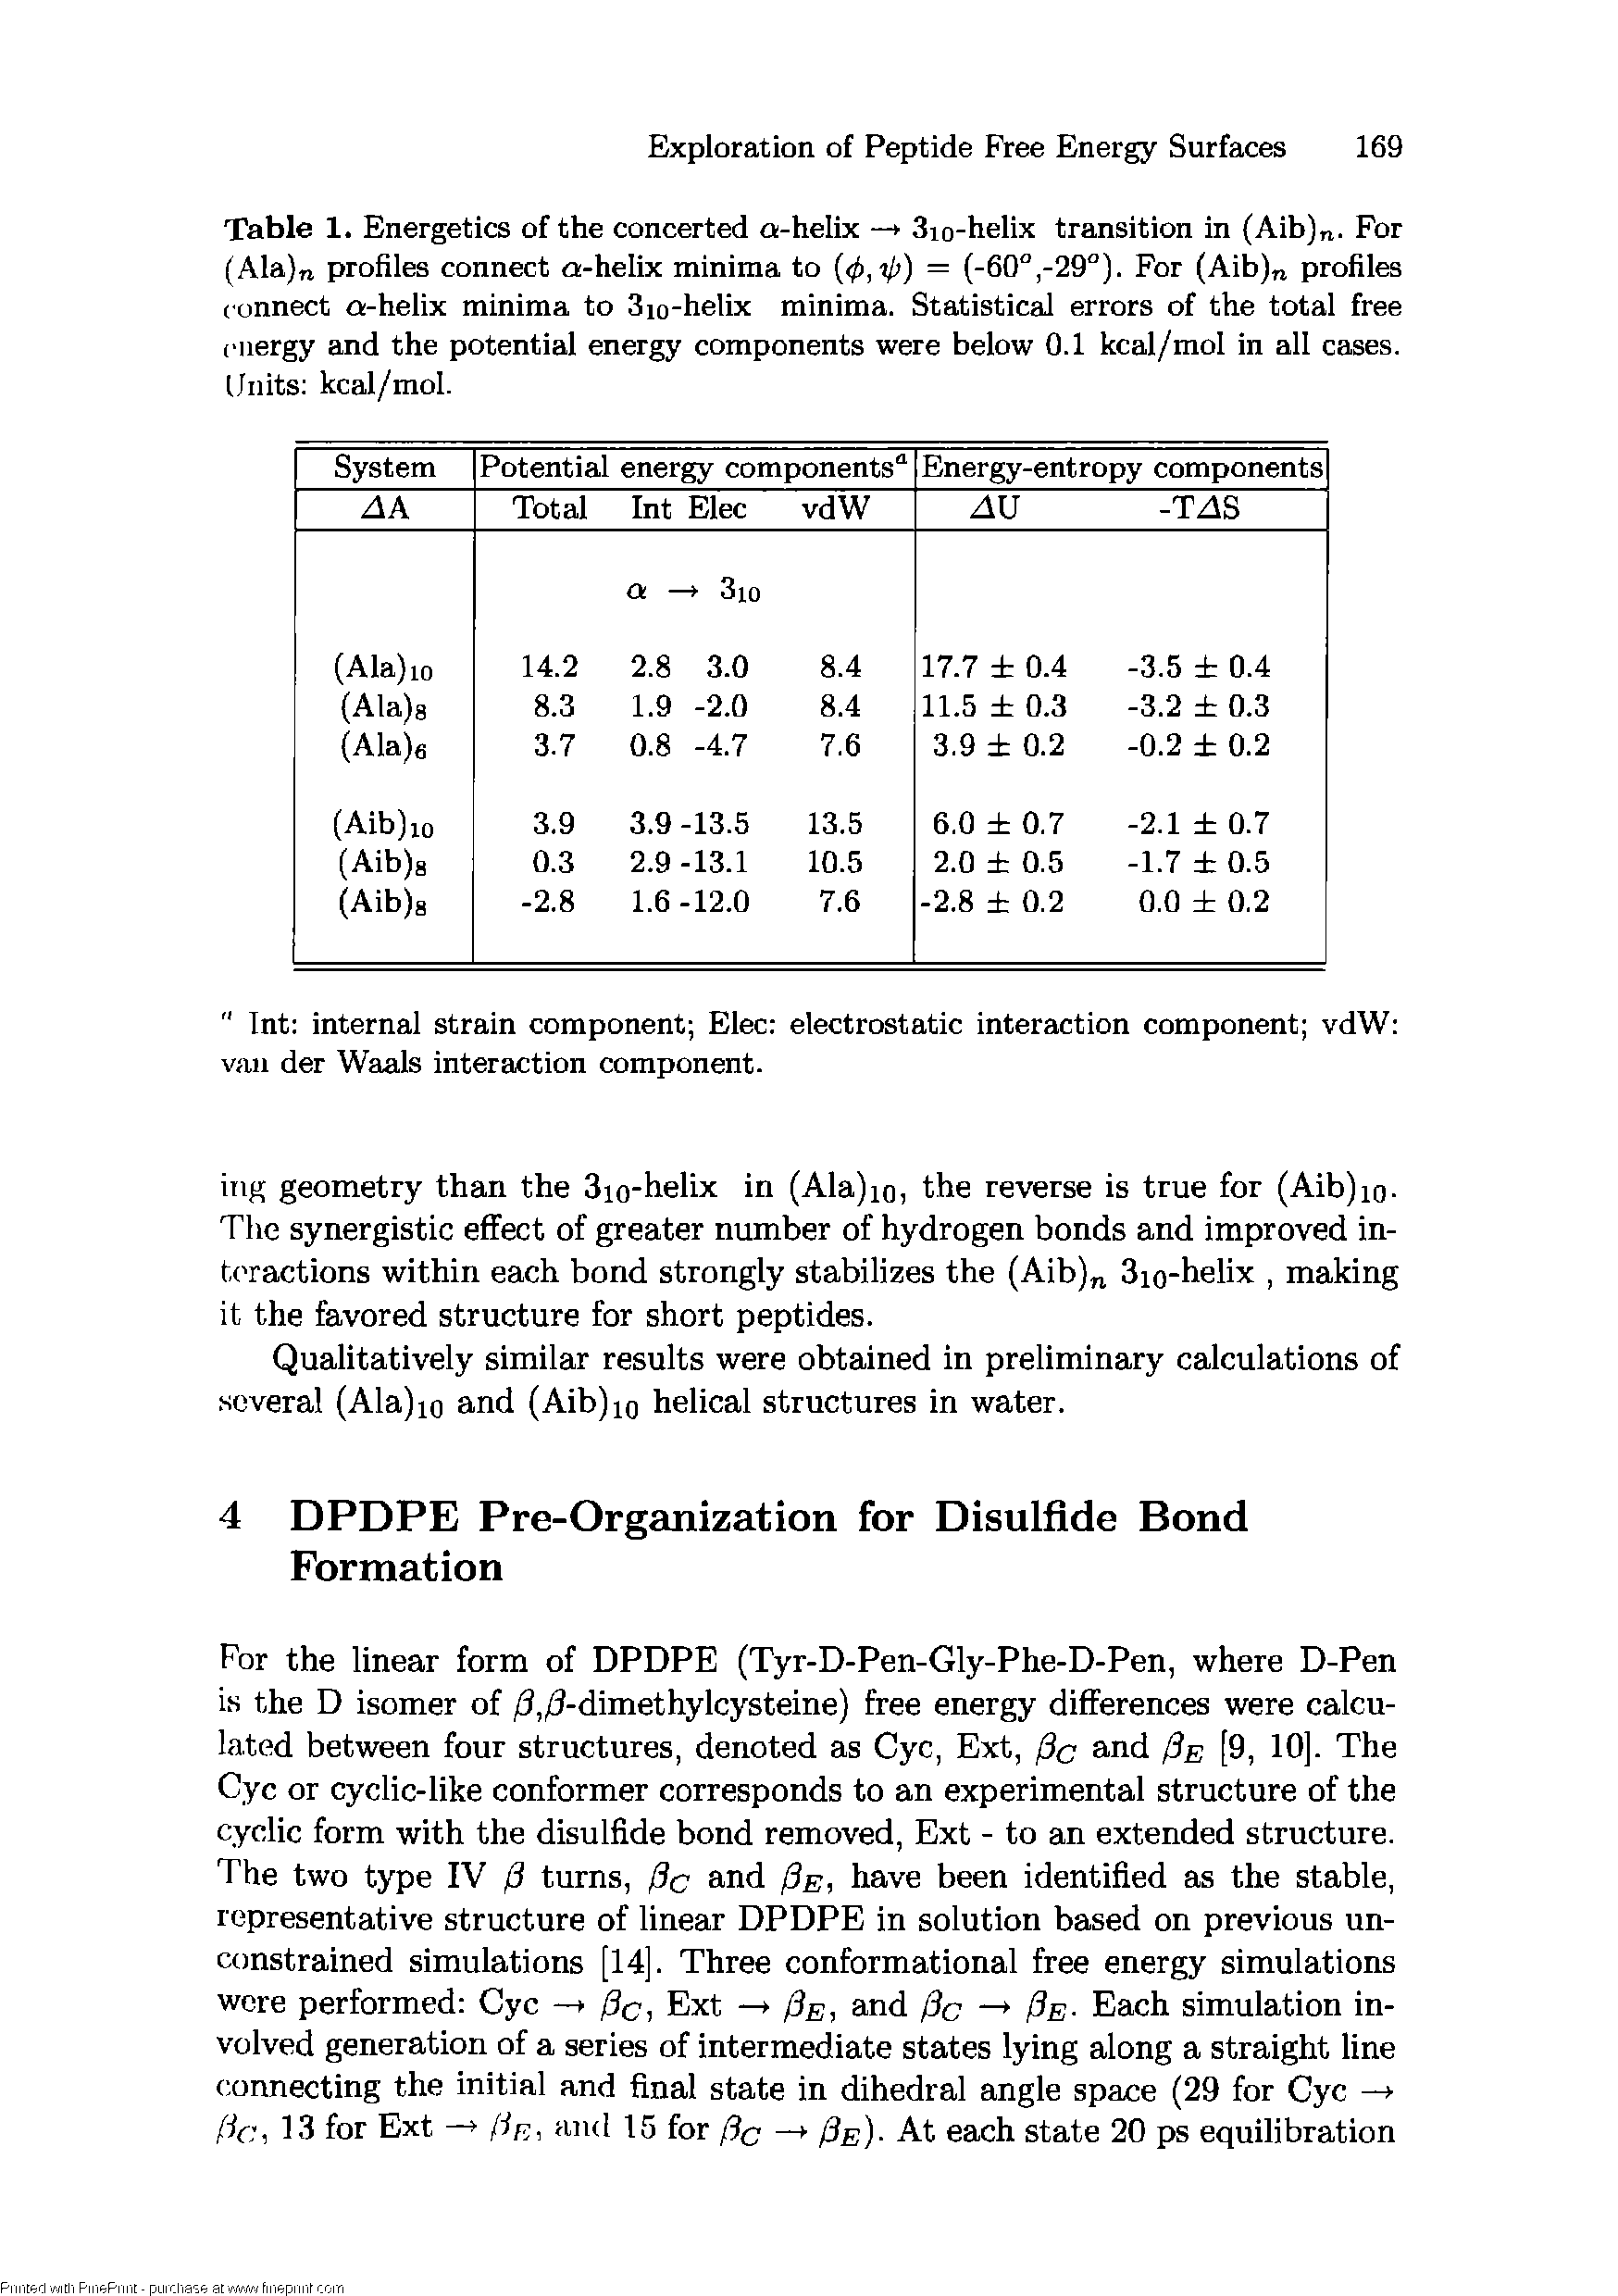 Table 1. Energetics of the concerted a-helix — 3io-helix transition in (Aib)n. For (Ala)n profiles connect a-helix minima to = (-60°,-29°). For (Aib)n profiles...